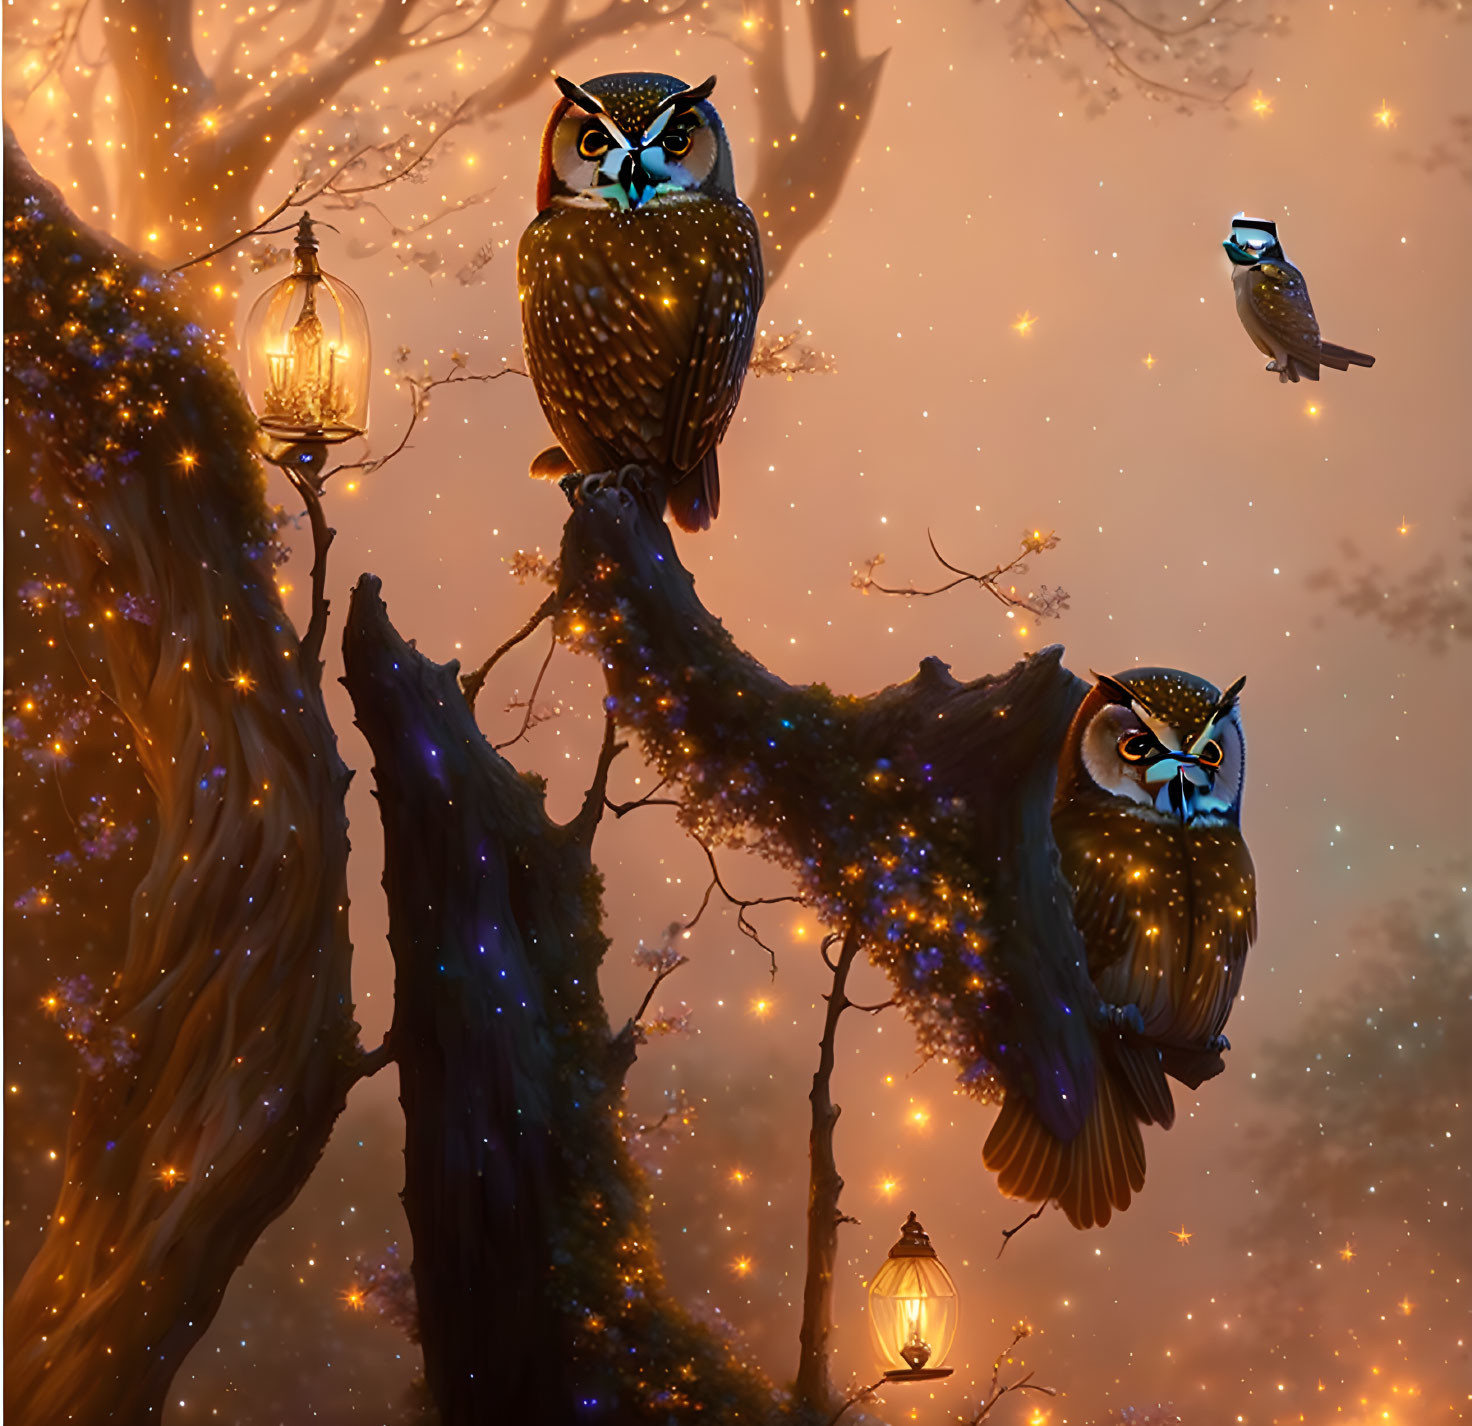 Three owls on tree branches with fairy lights and lanterns in twilight